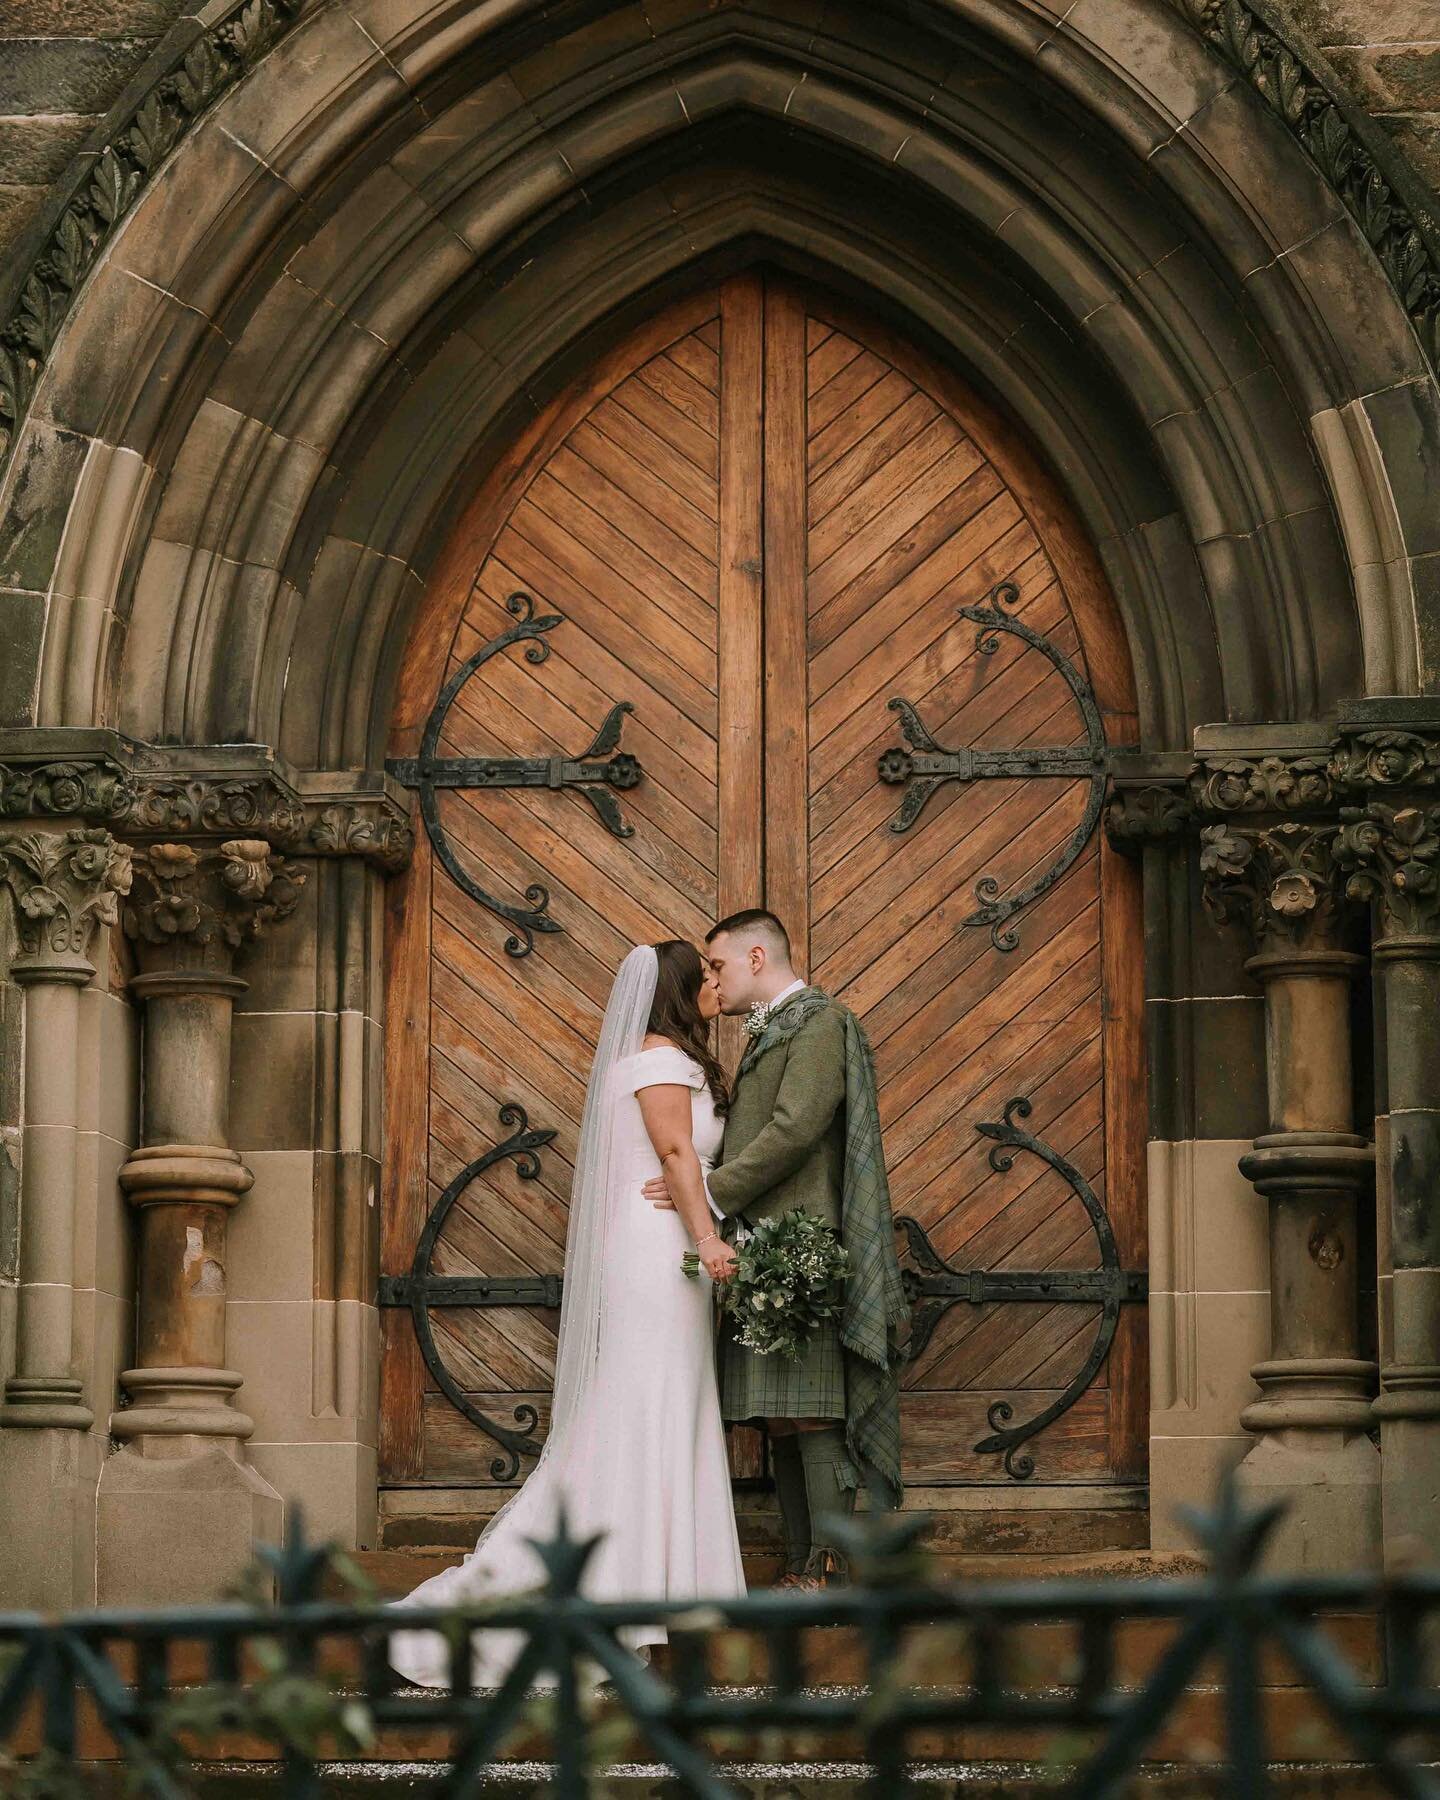 Haven&rsquo;t posted in a wee while! I&rsquo;m still here, I promise. Lots more photos and updates coming soon 💗
.
.
.
.
.
#nikon #wedding #letsgetmarried #cottiers #cottierswedding #cottiersglasgow #cottierstheatre #ayrshirewedding #scottishwedding